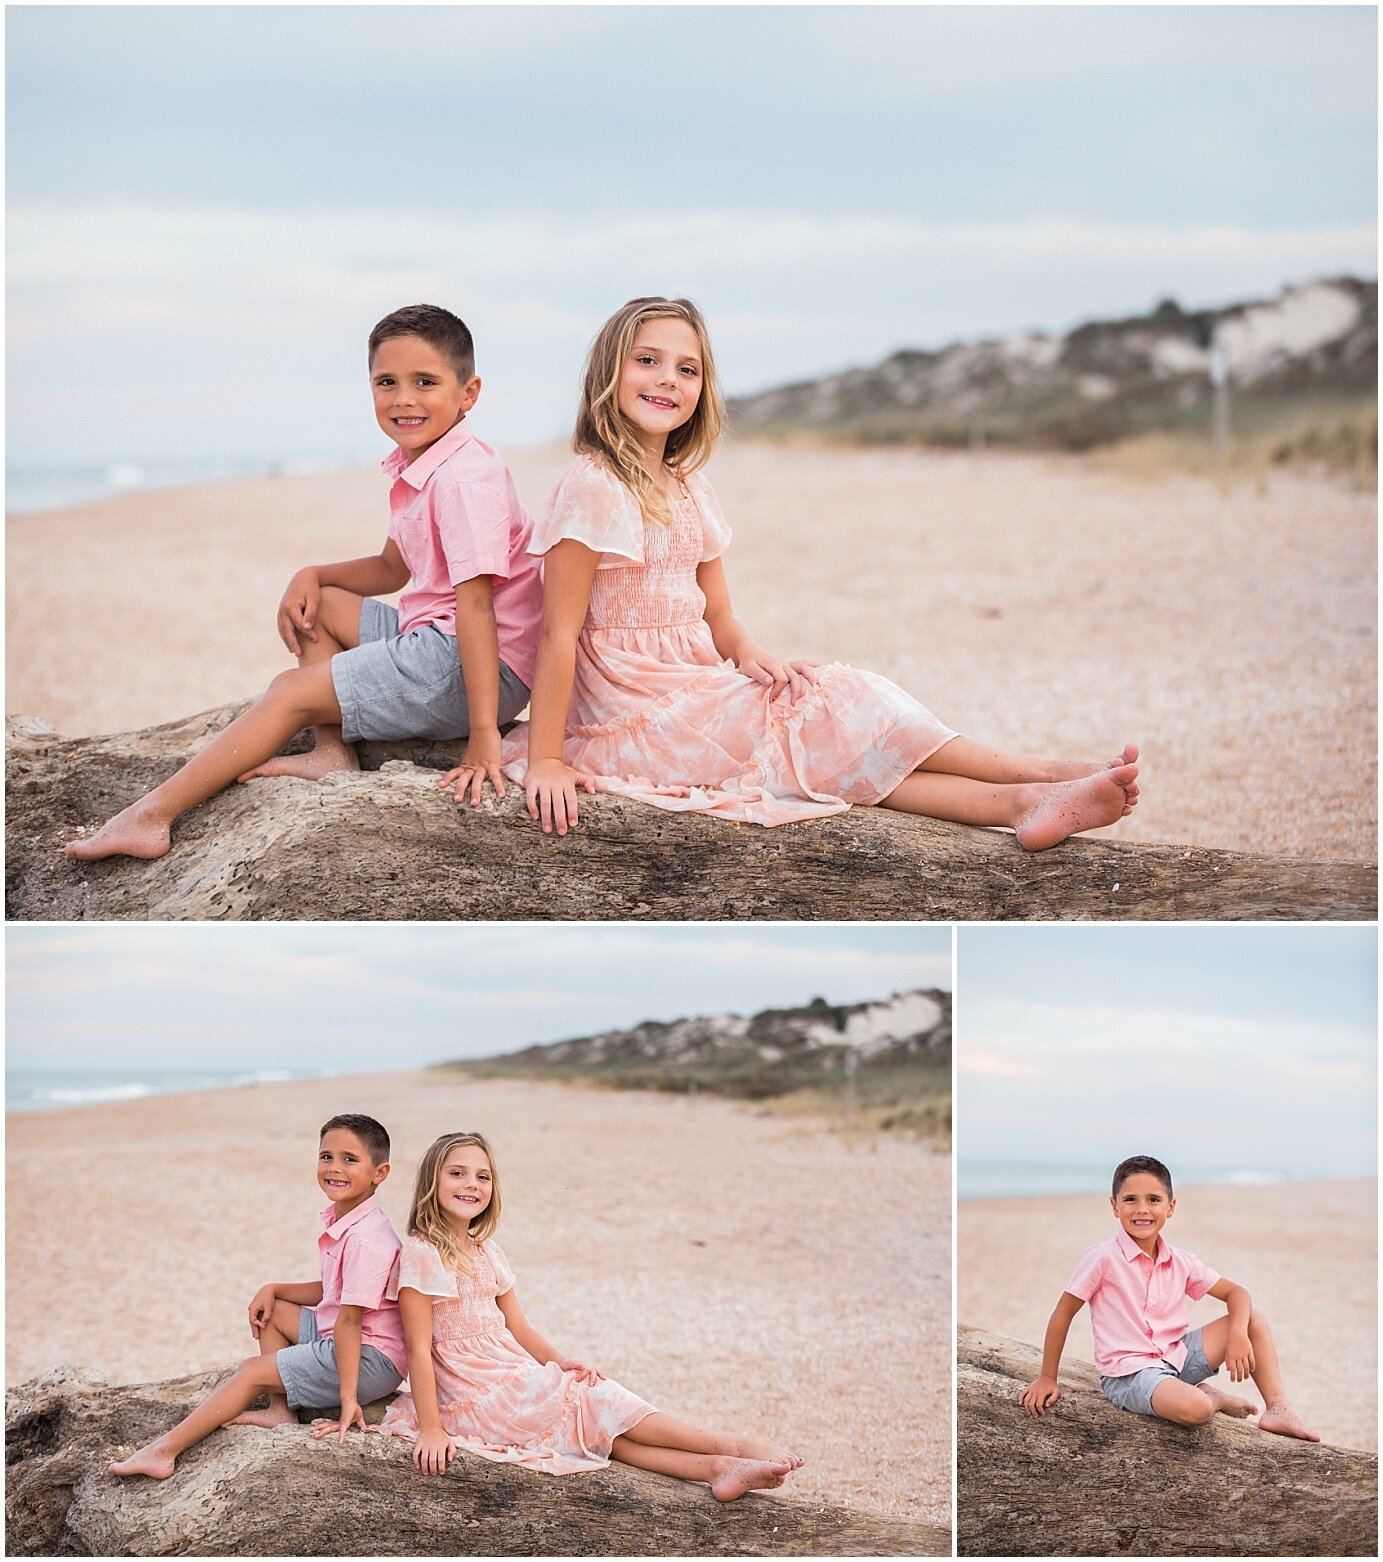 Sibling beach pictures in Ponte Vedra, FL